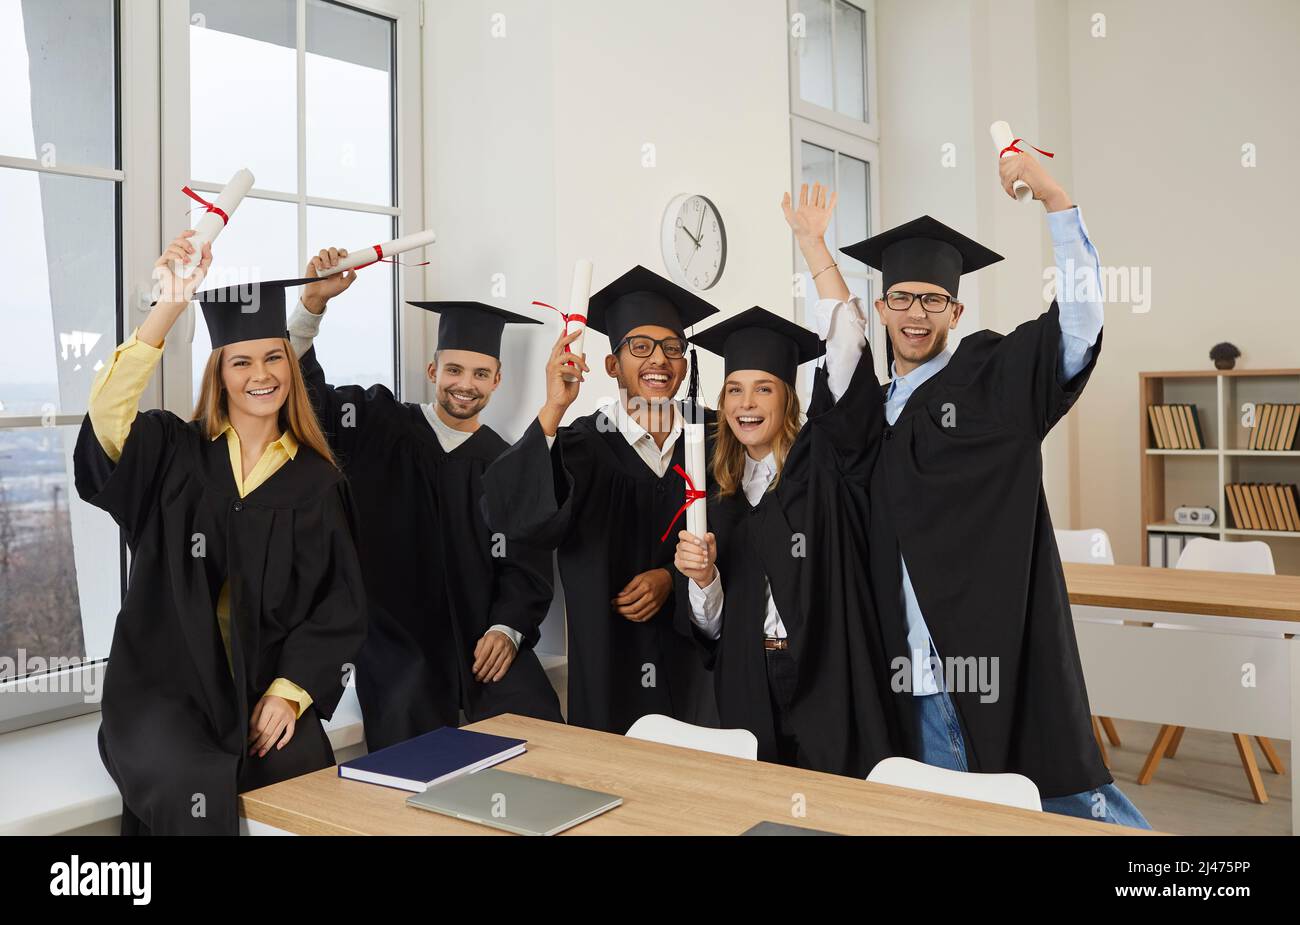 Group of happy joyful diverse university graduates in caps and gowns holding up diplomas Stock Photo